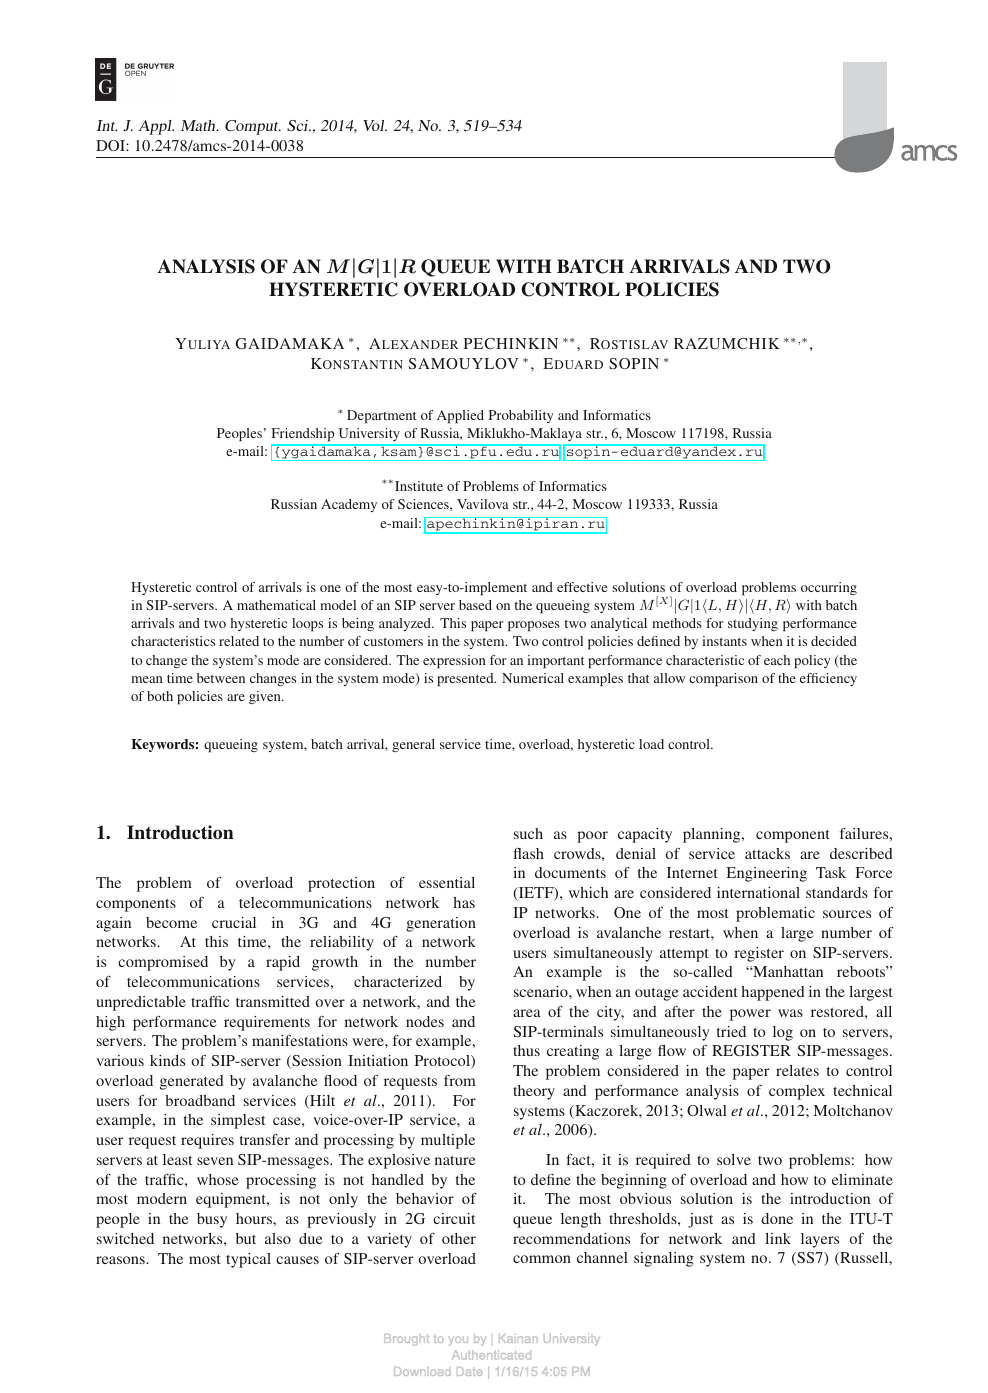 Analysis Of An M G 1 R Queue With Batch Arrivals And Two Hysteretic Overload Control Policies Topic Of Research Paper In Mathematics Download Scholarly Article Pdf And Read For Free On Cyberleninka Open